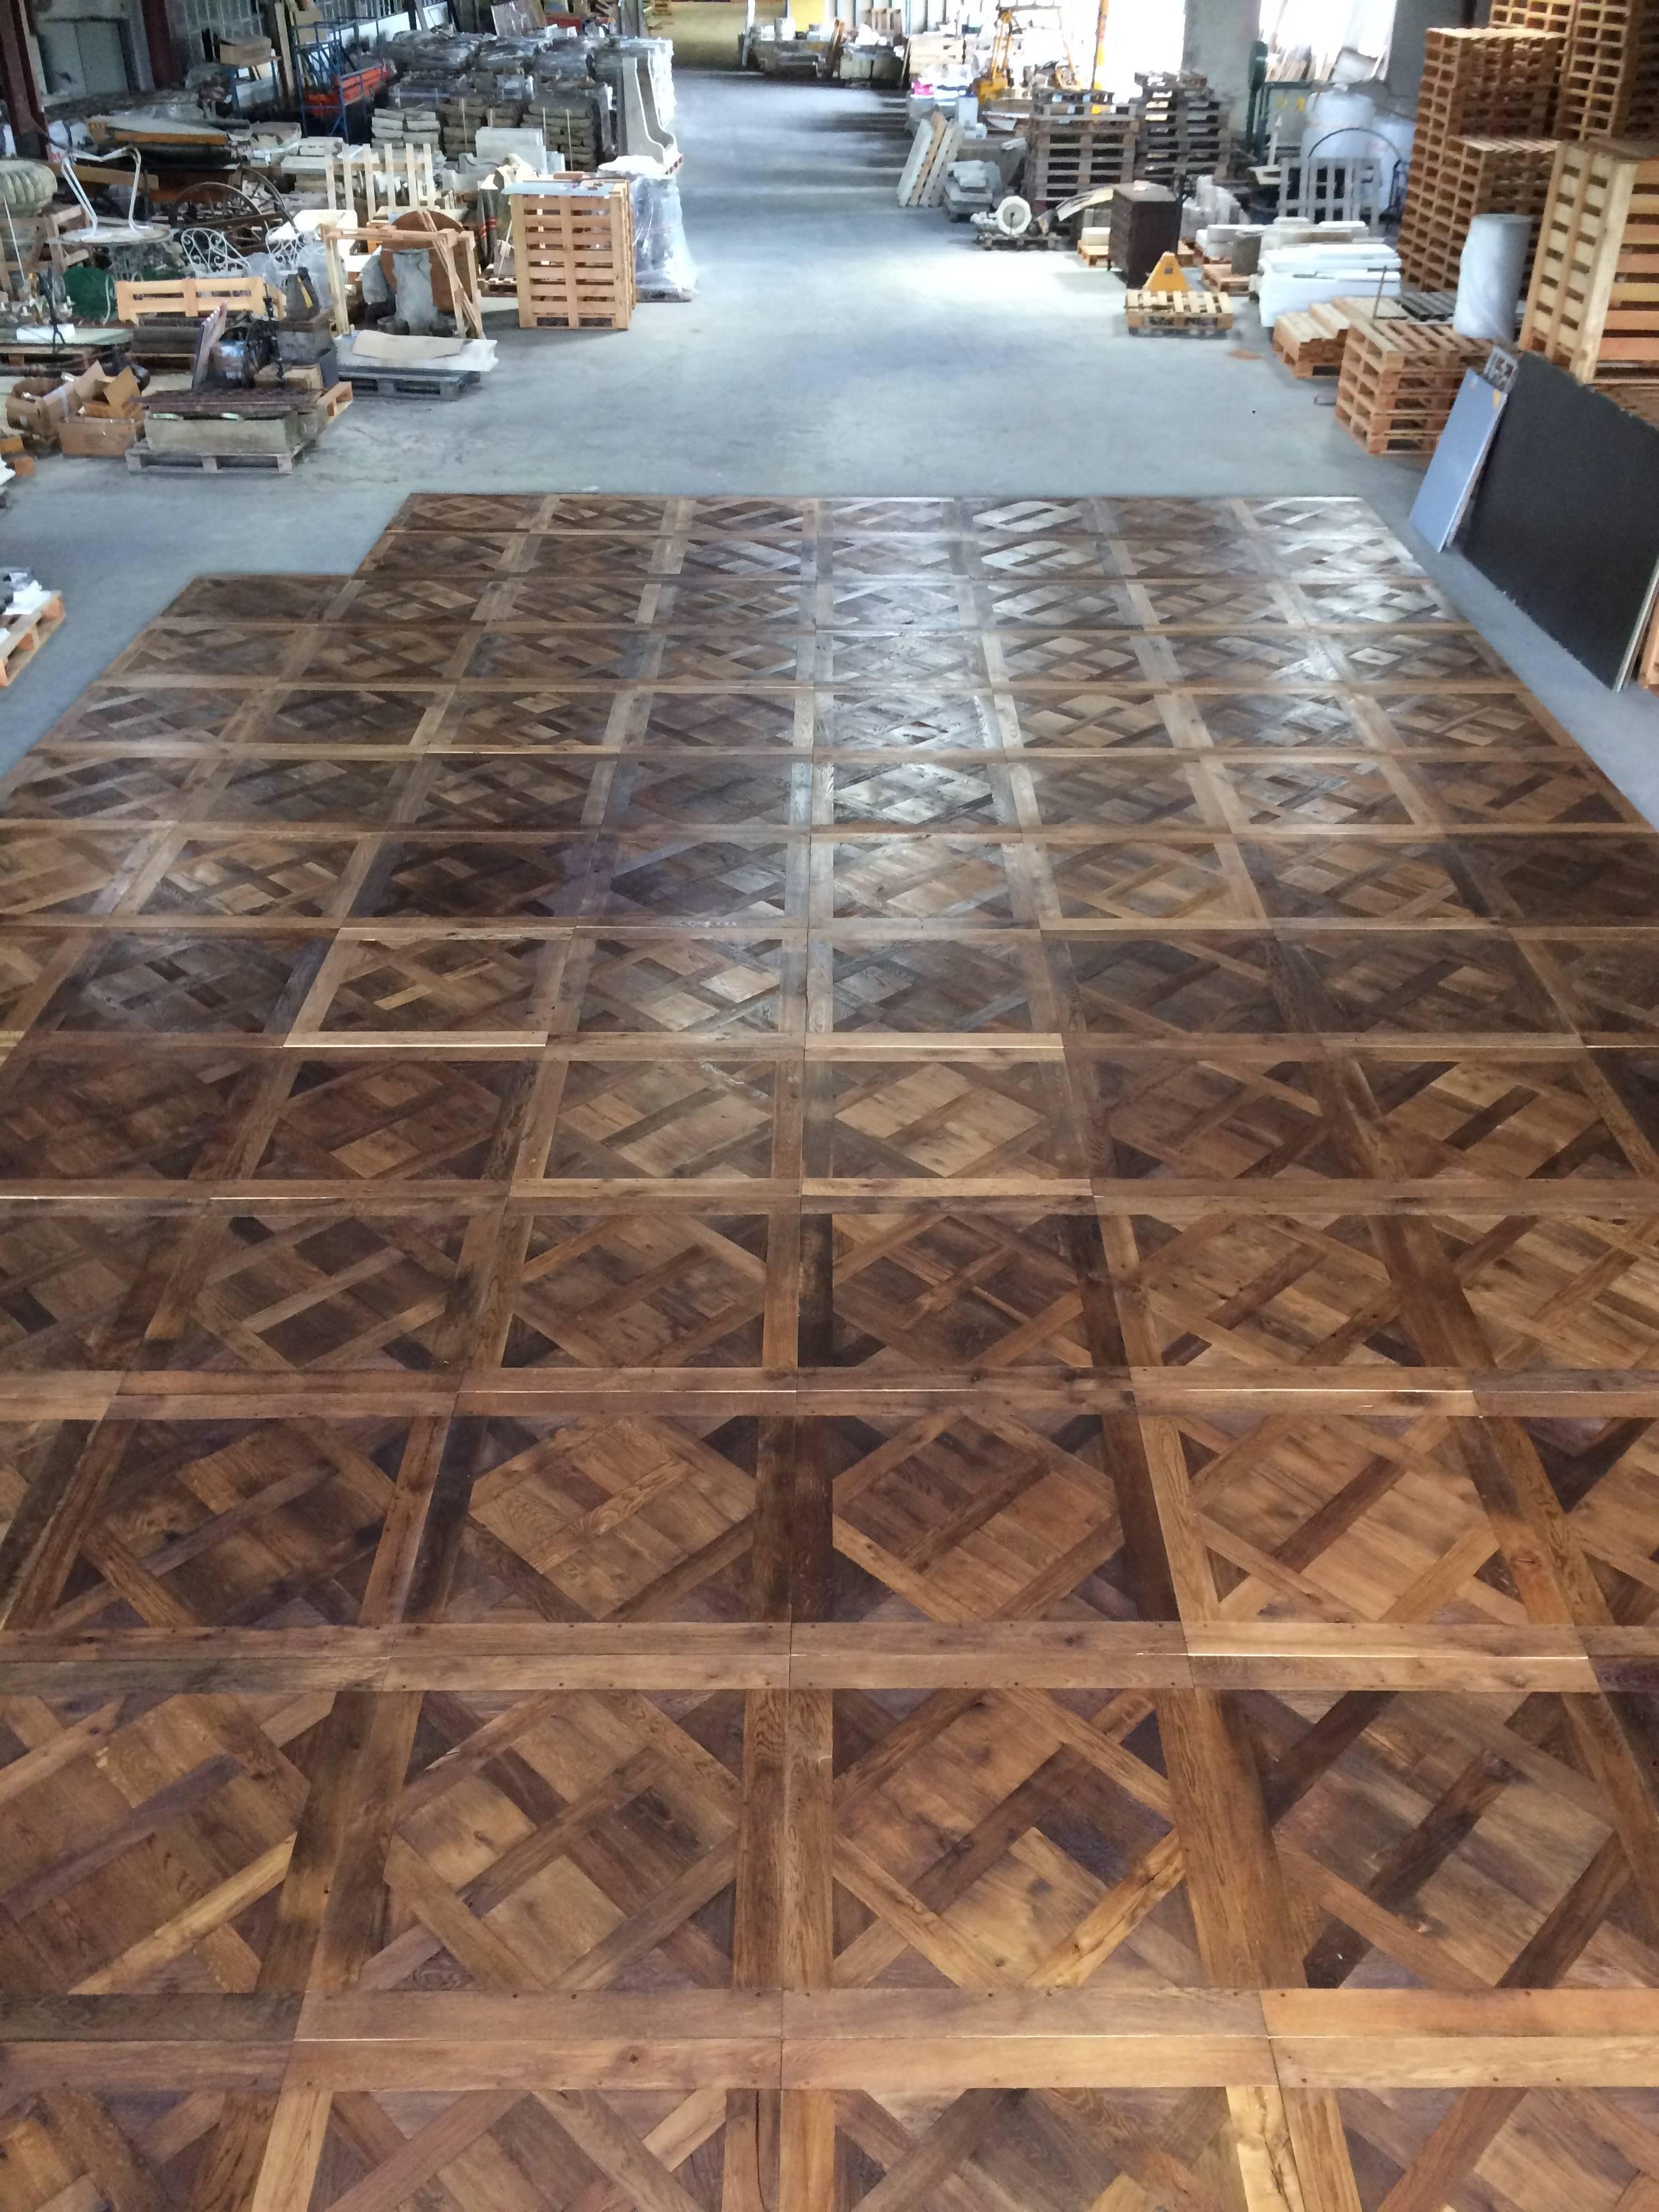 French parquet de France solid antique oakwood handmade in France.
Excellent quality work, hand finished as the old way like 200 years old.
Ready for installation as it is, excellent condition.
Each panel is about 10 square feet (1m2).
Price is per